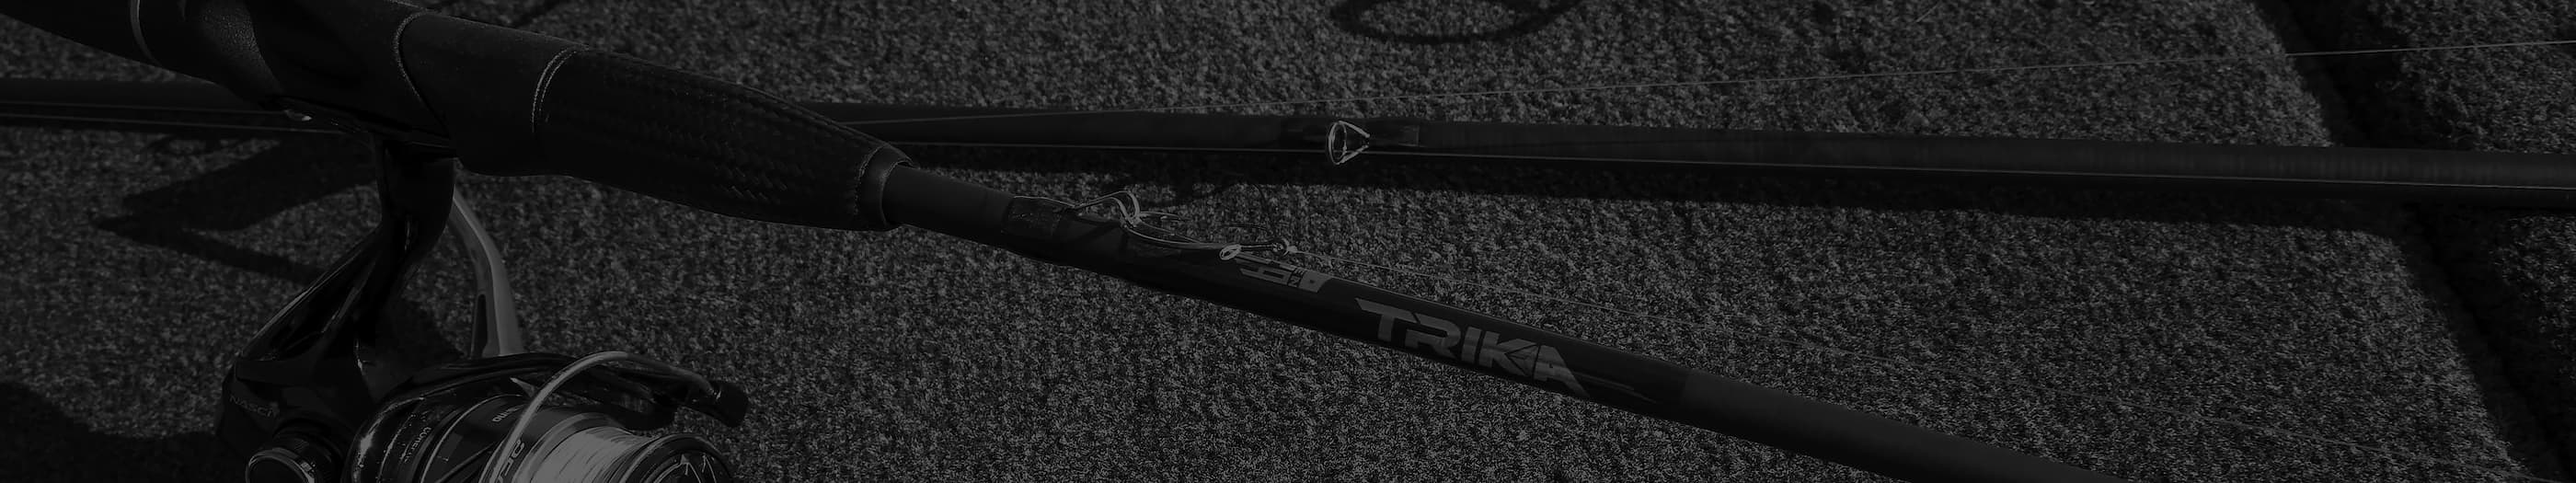 Close up of a Trika fishing rod that shows the carbon material and Kigan guides